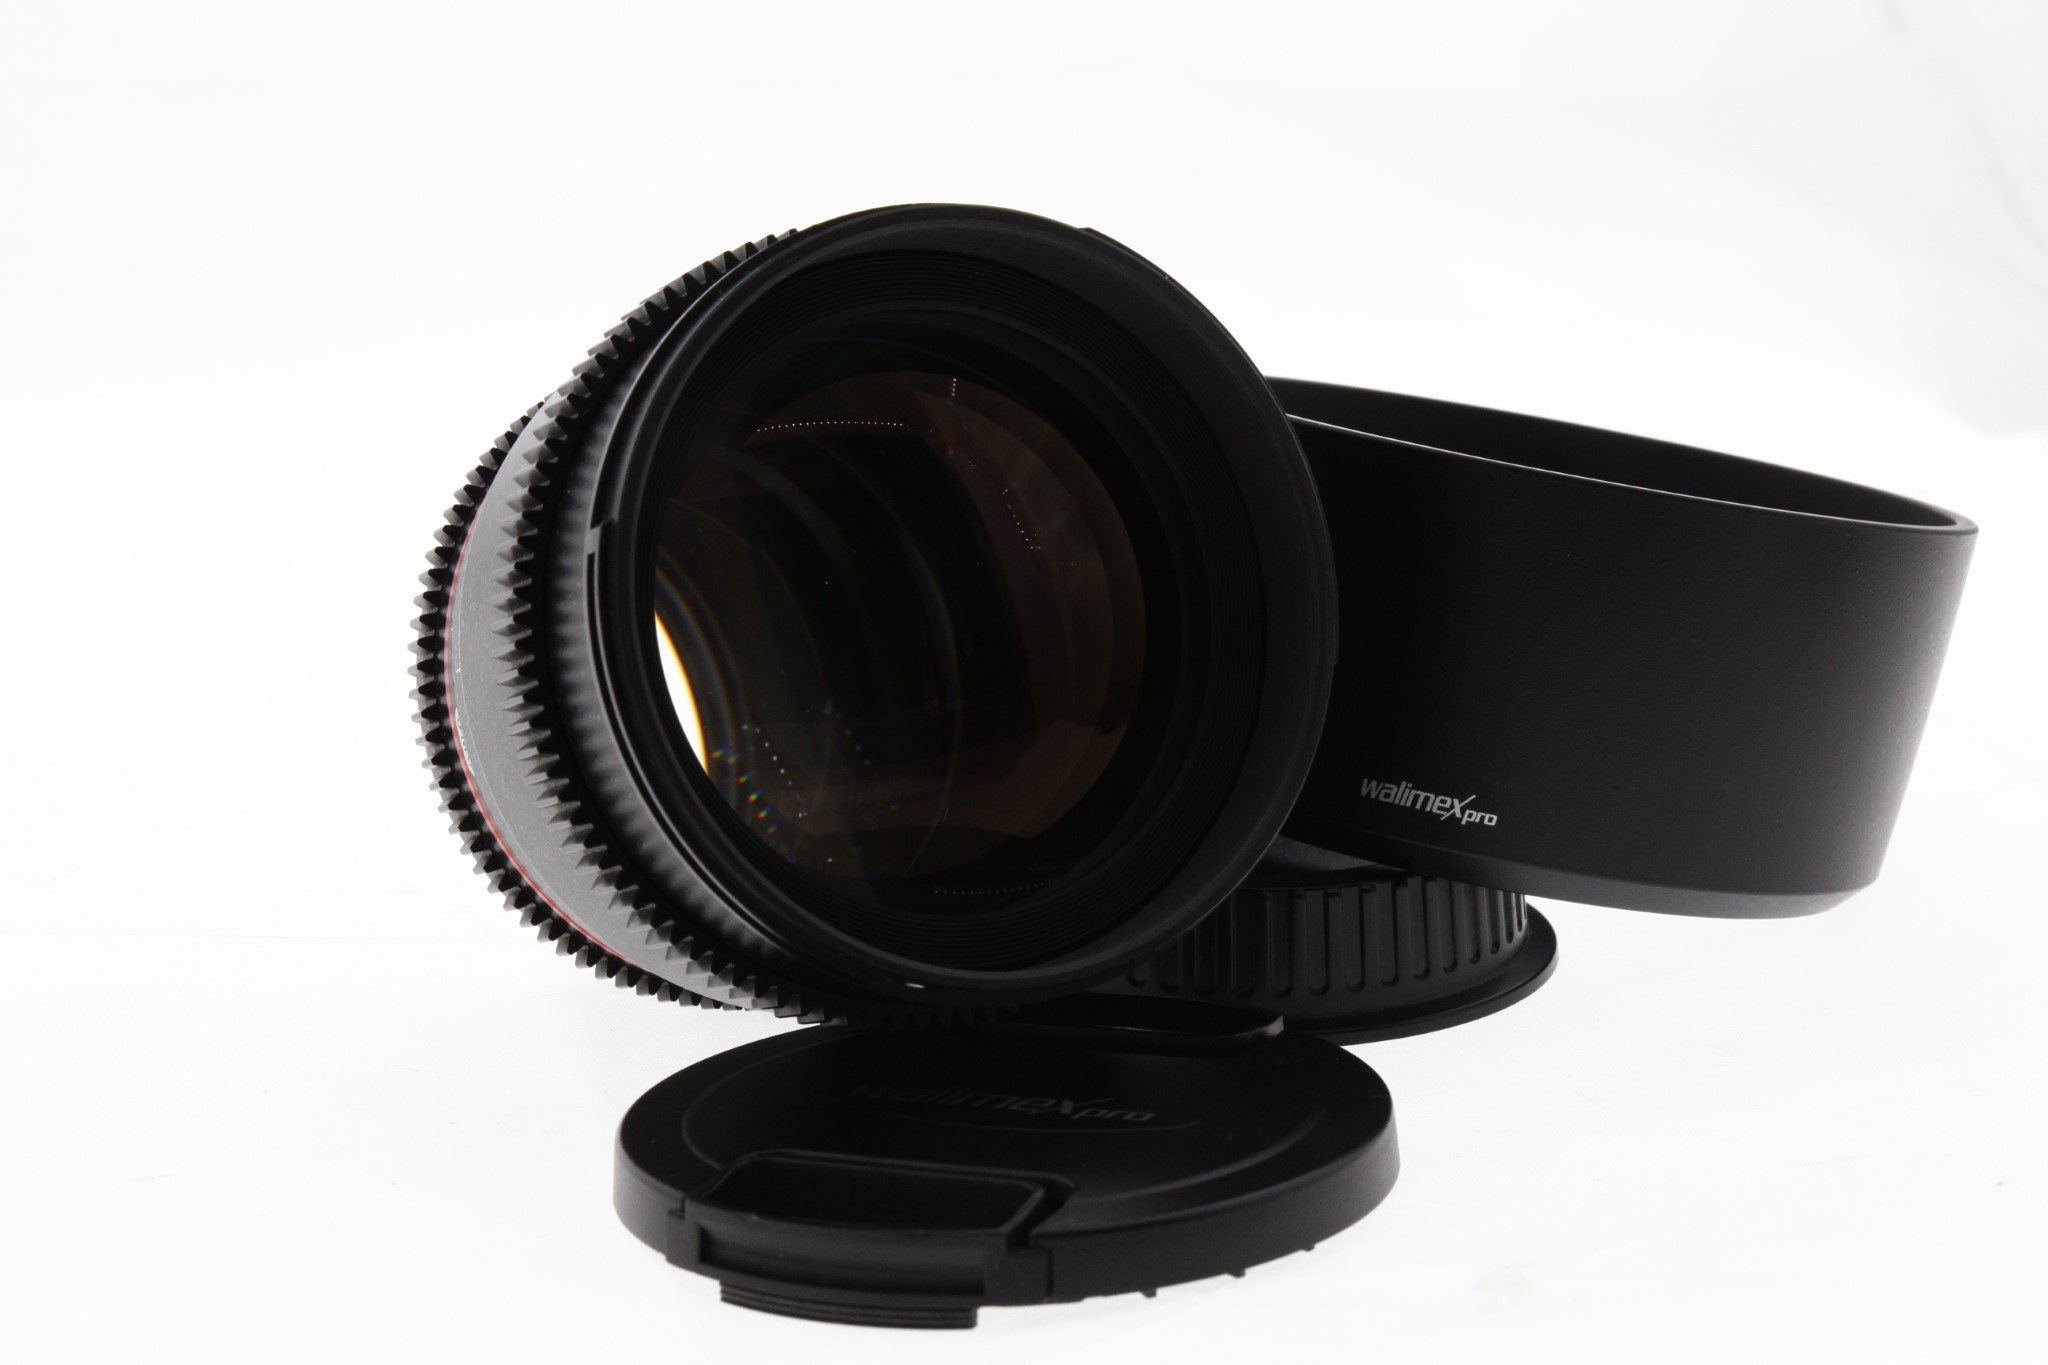 Walimex 85mm f/1.5 AS IF UMC + clona Full-Frame pro Canon